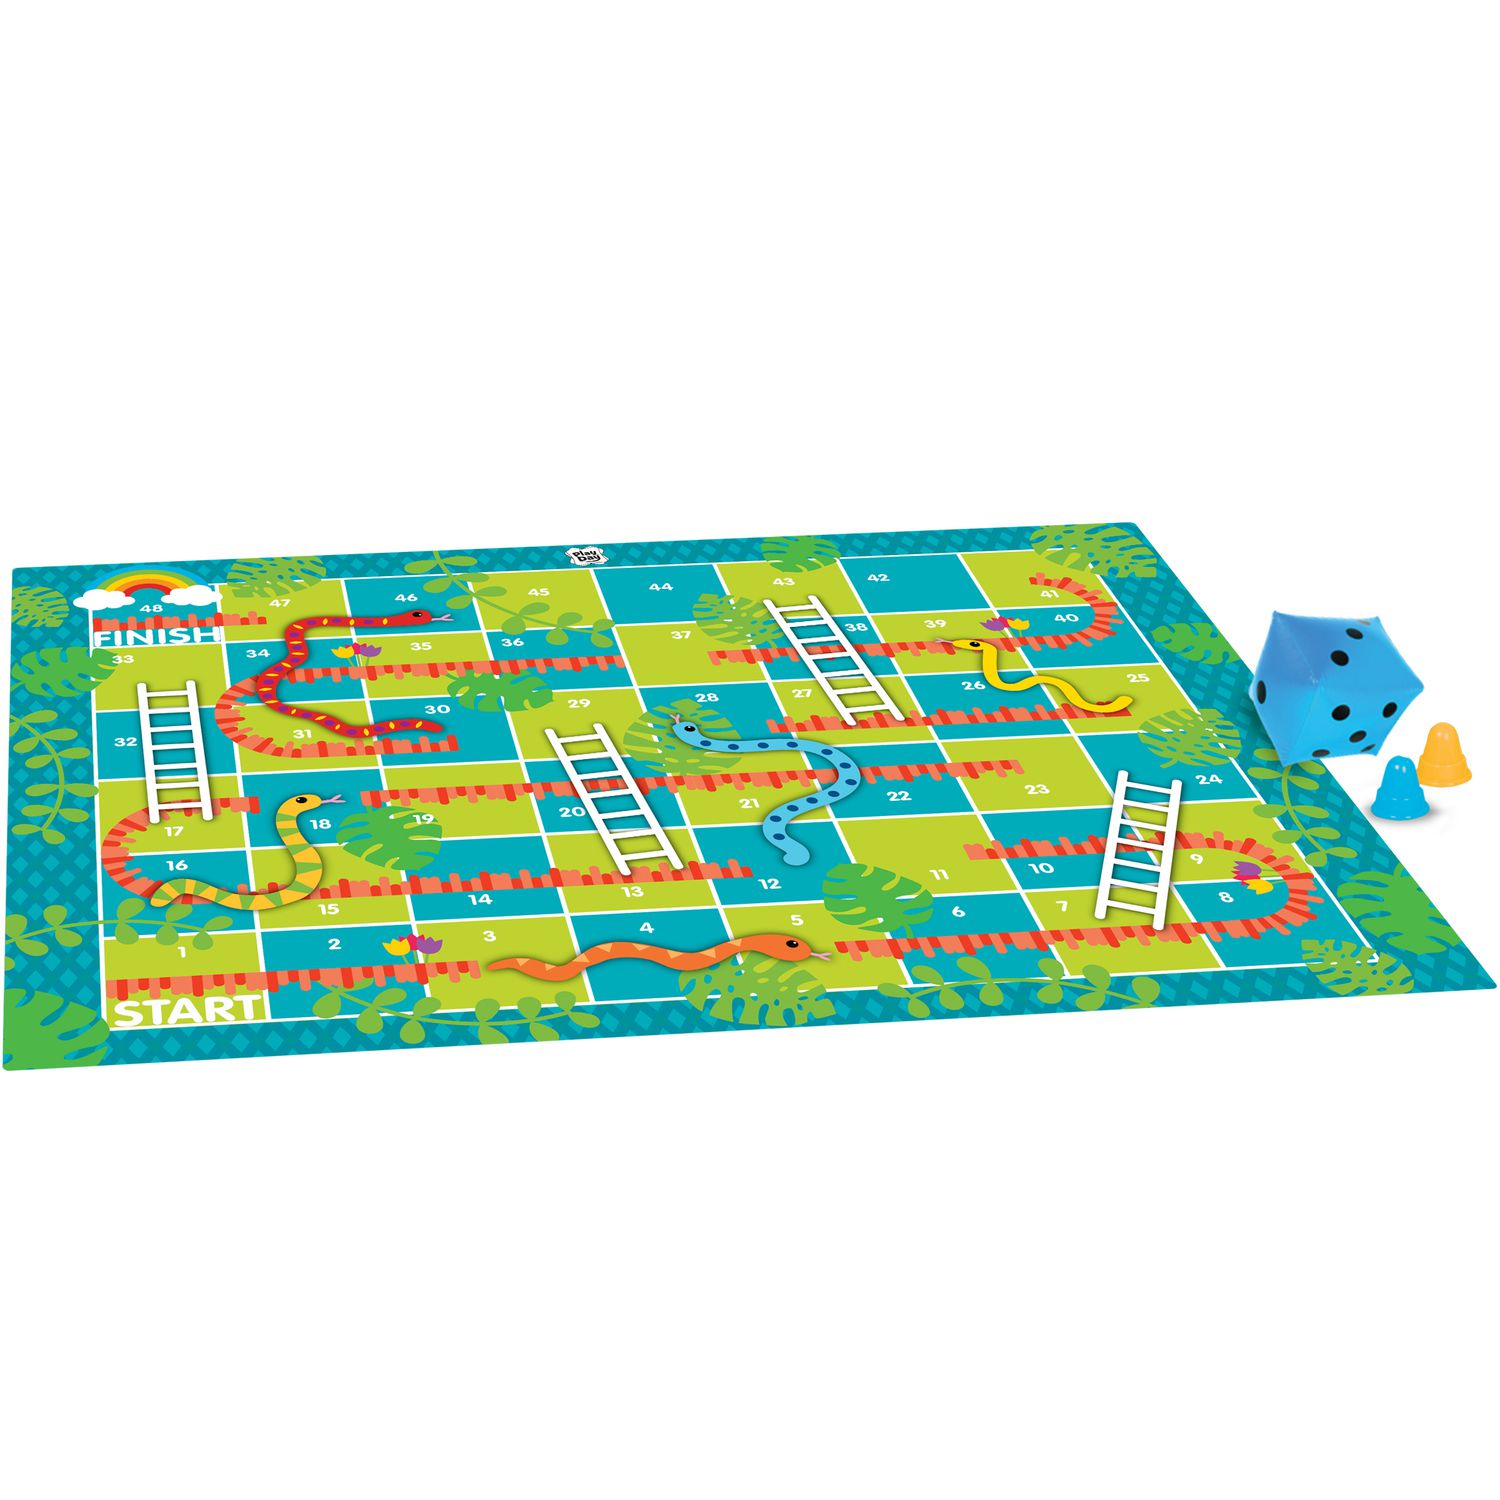 Upper Midland Products Giant Snakes & Ladders Game 9.8 x Foot Life Size  Playing Mat with 8 Ground Pegs A Large Inflatable 15'' Dice, Storage  Carrying